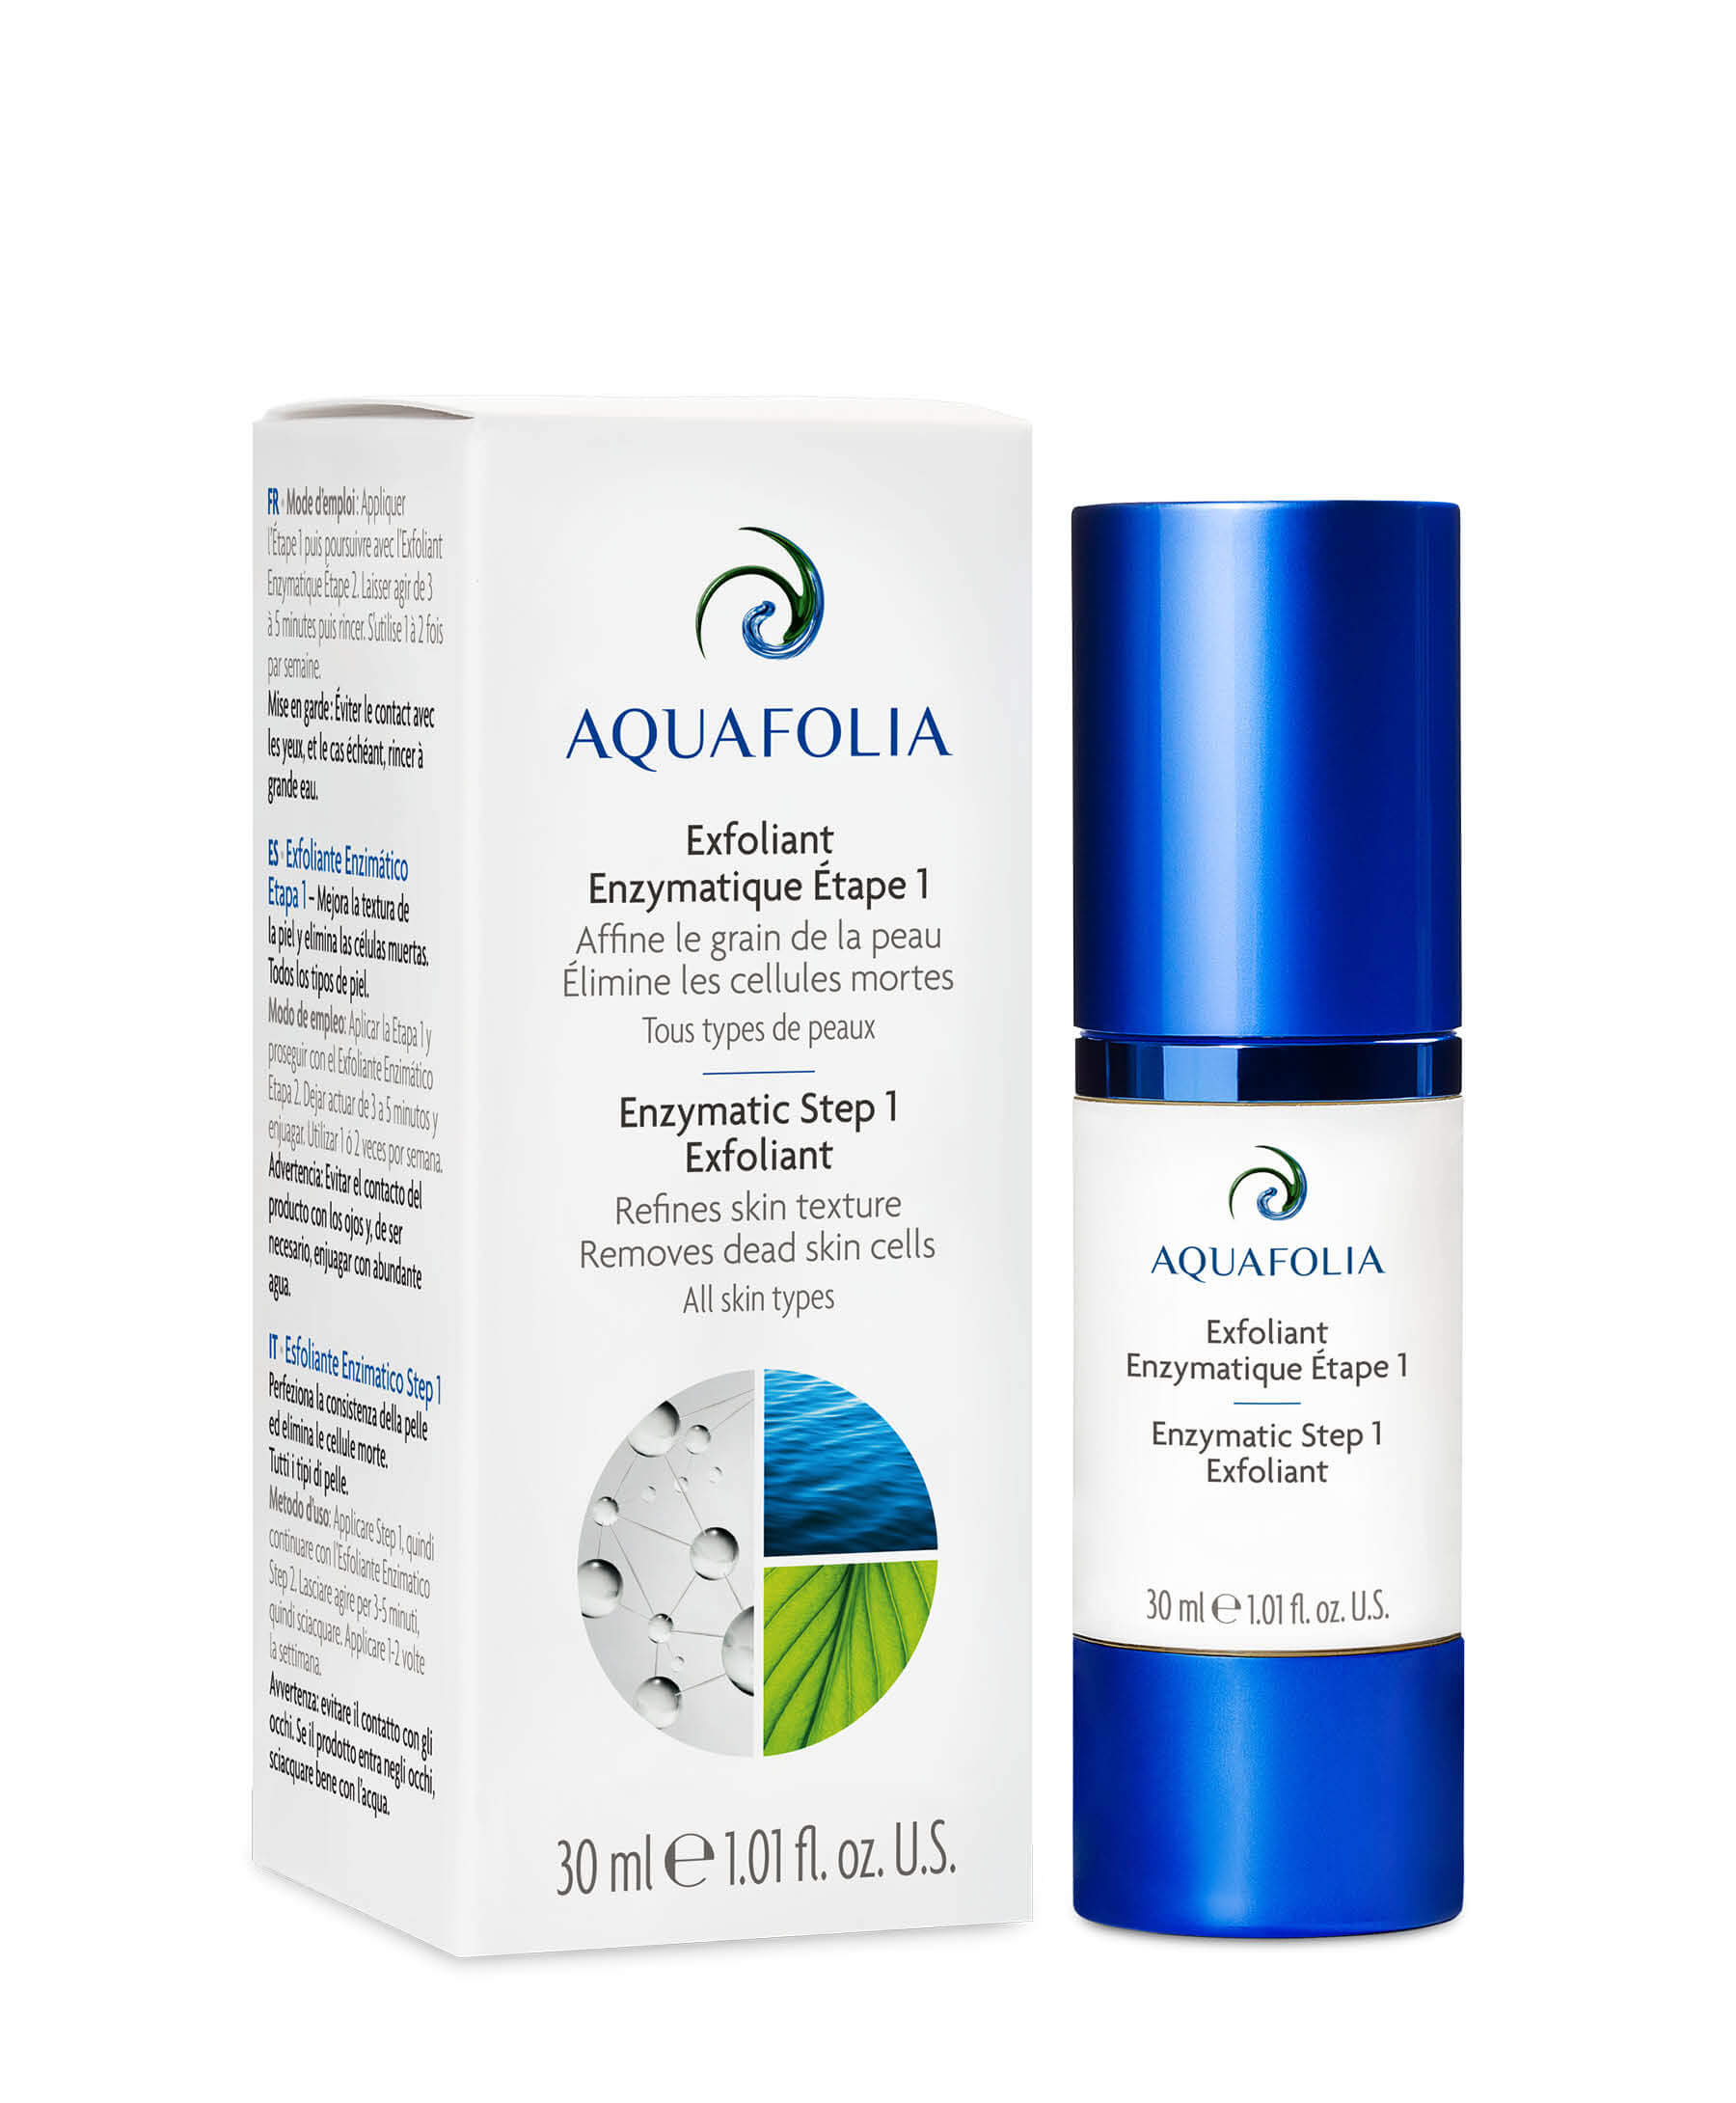 Aquafolia enzymatic Step-1 exfoliant, refines skin texture, removes dead skin cells, all skin types, lipid regeneration, dehydrated skin, Product image, box, bottle, white background